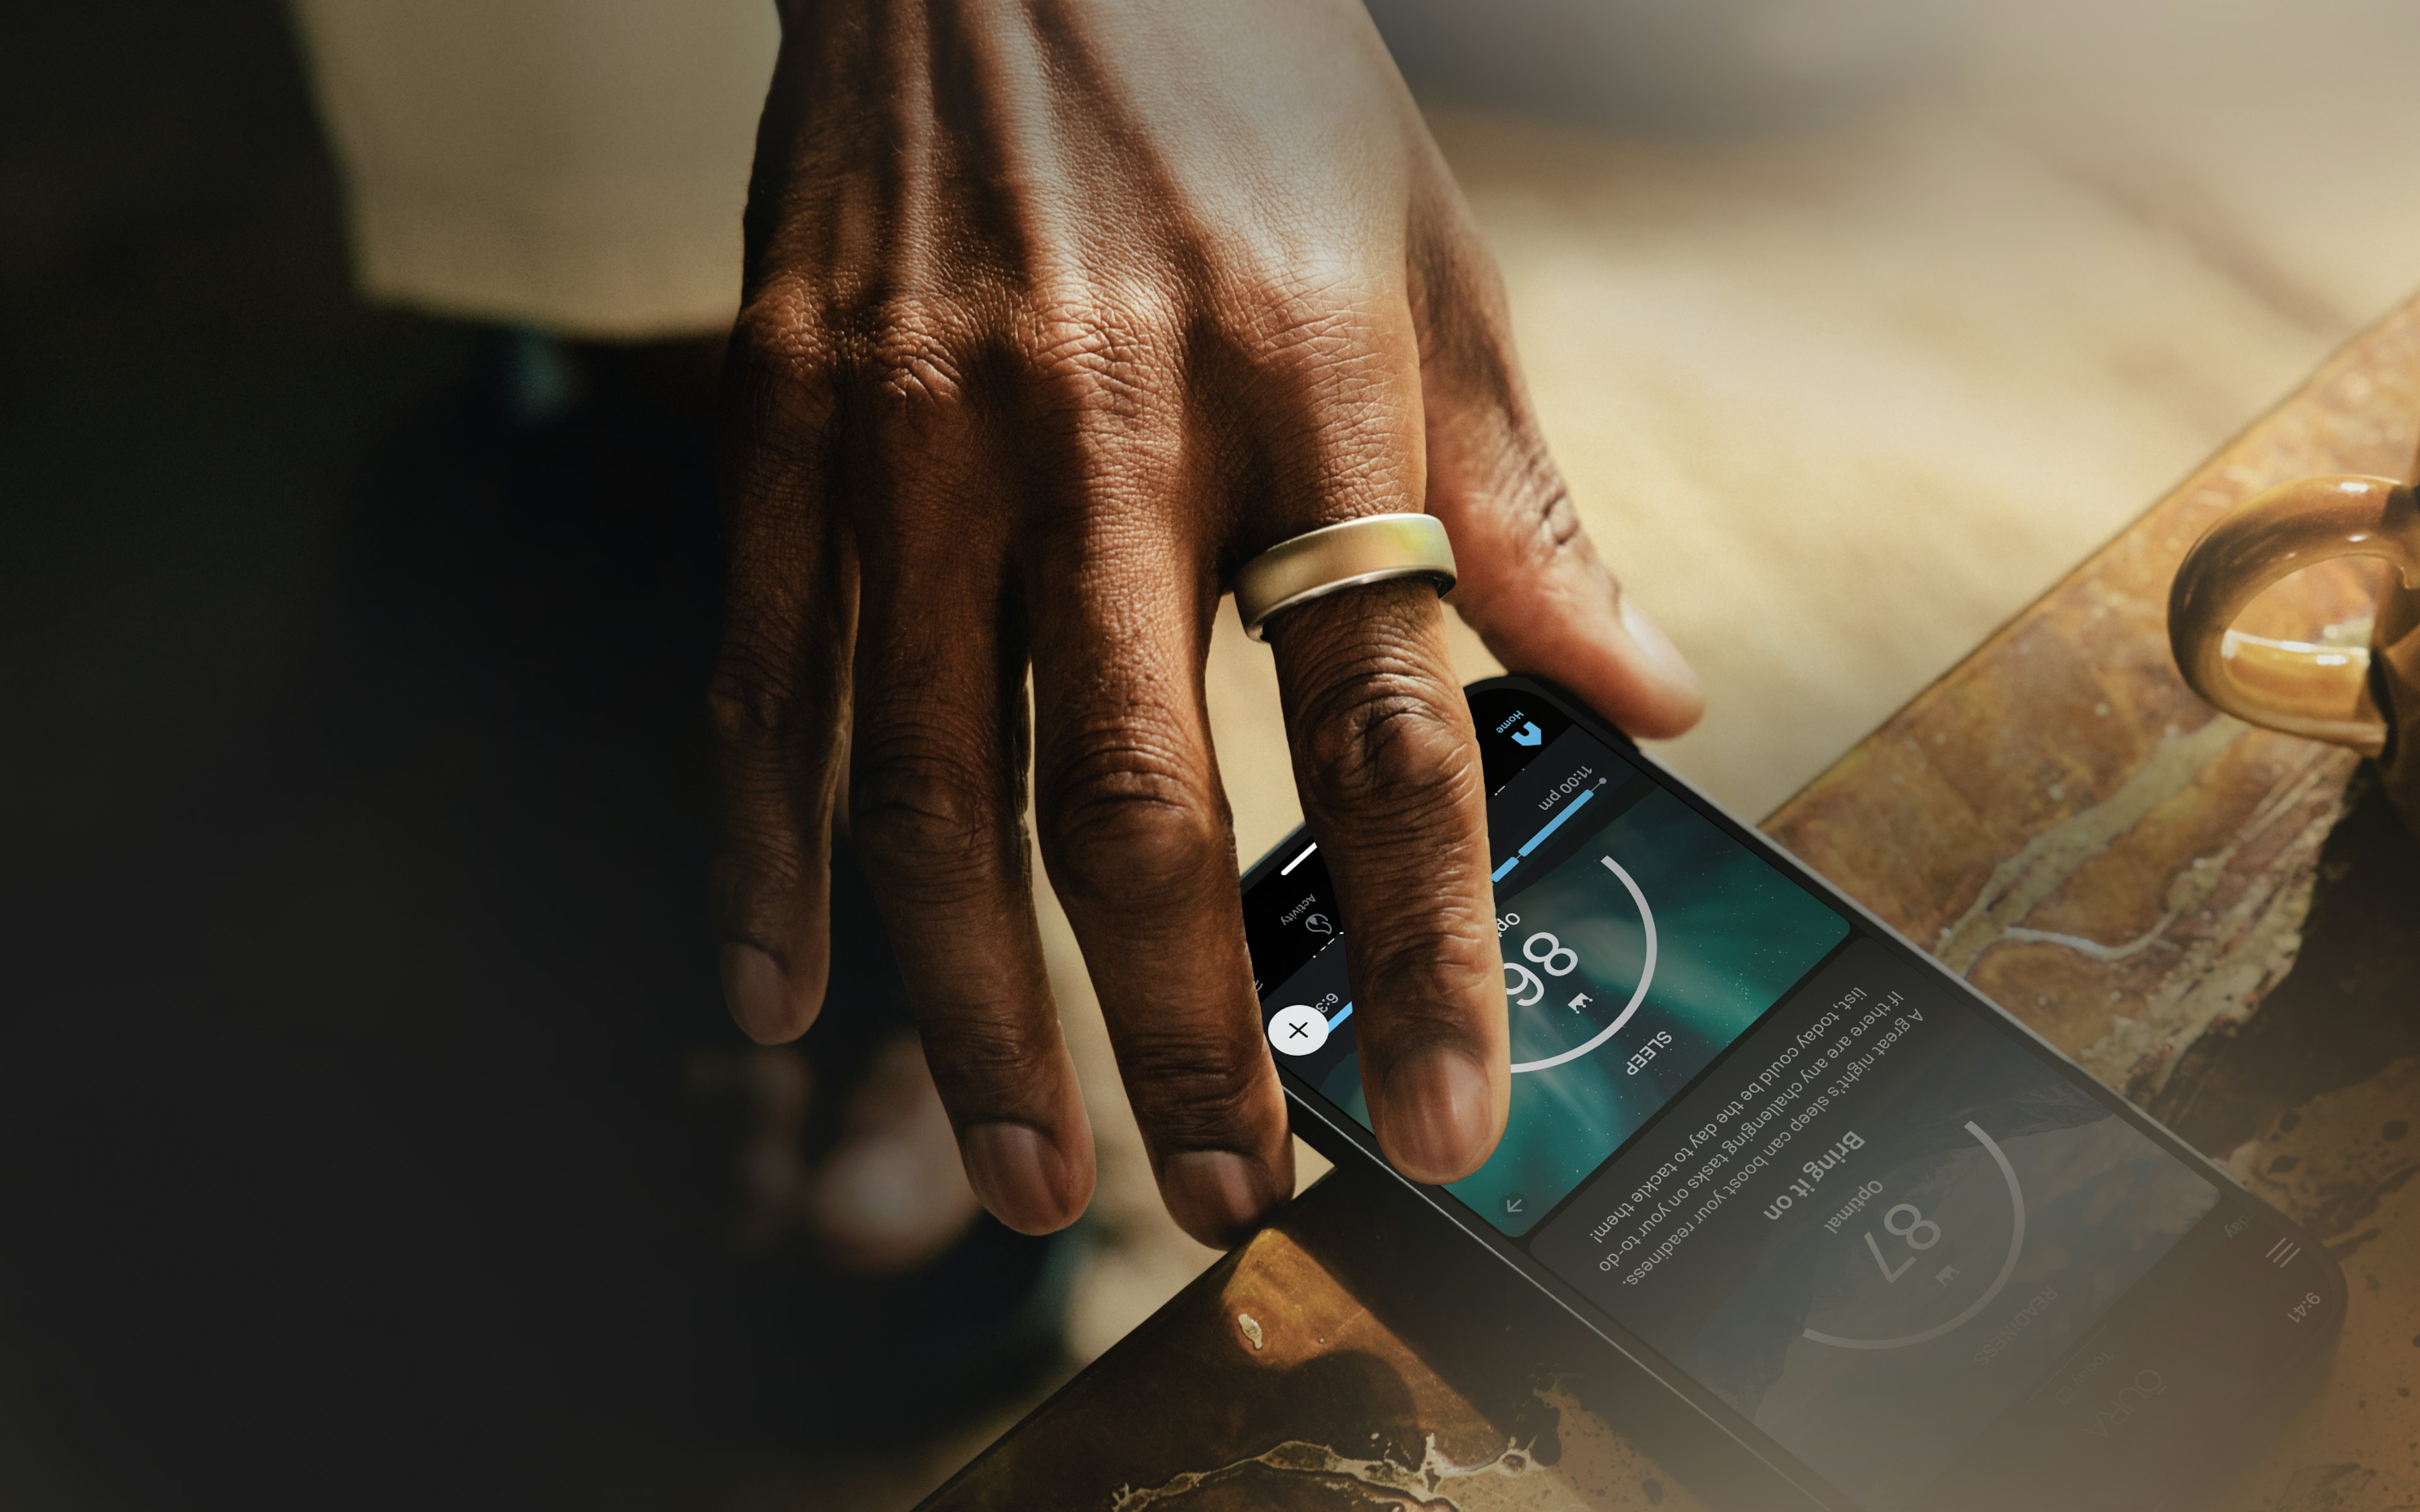 Oura Ring featured on a hand reaching for a mobile device with the Oura app open